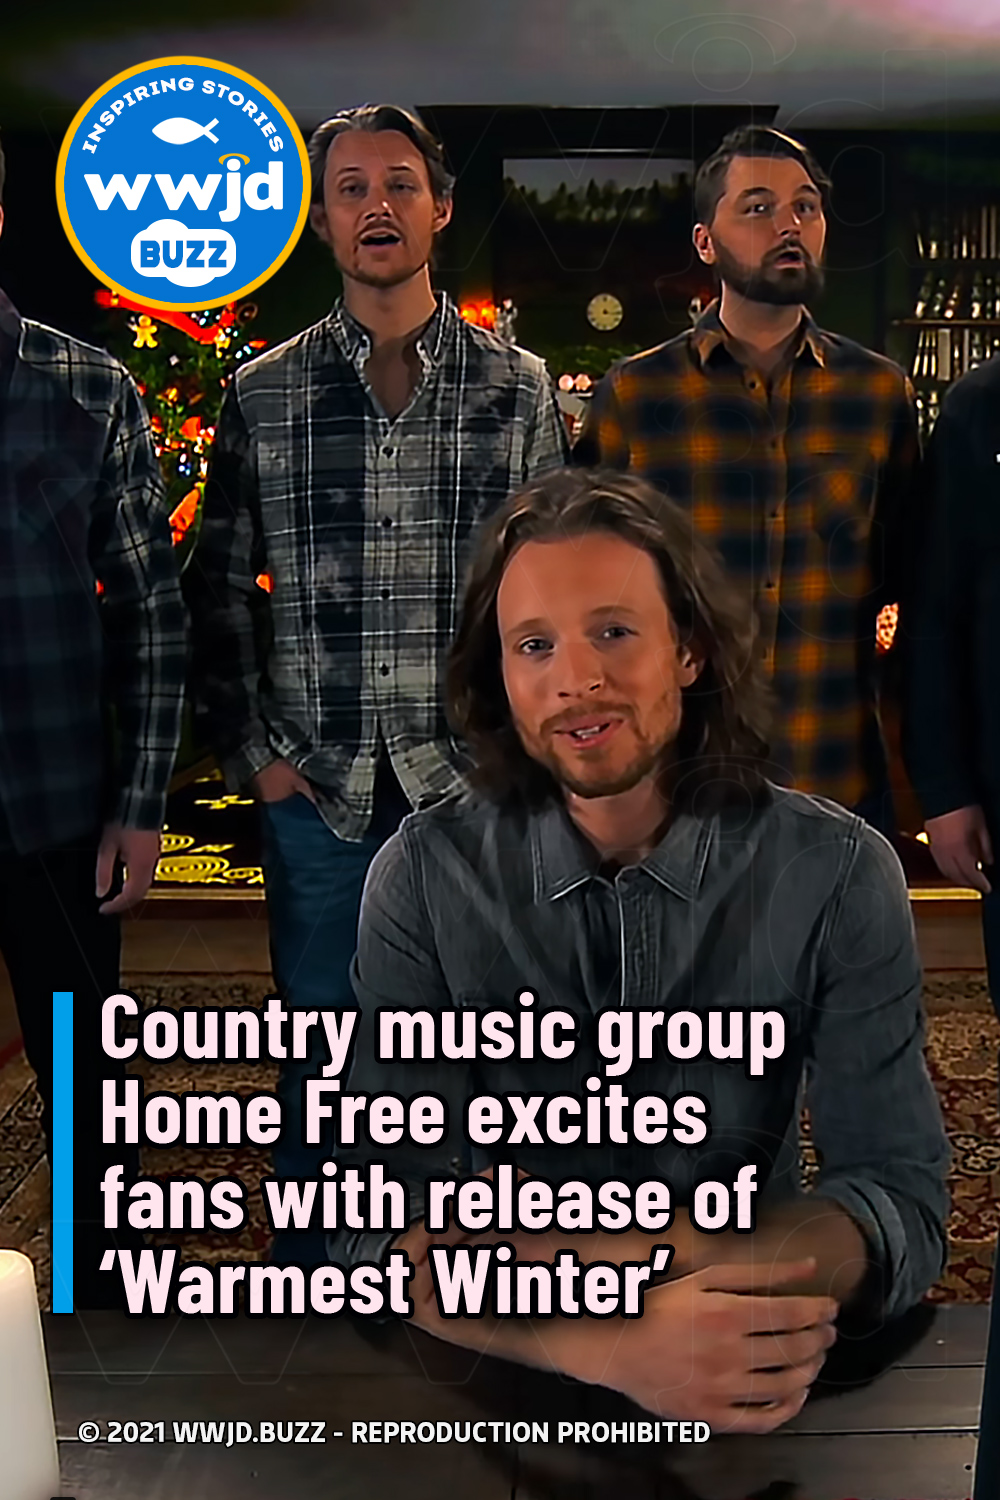 Country music group Home Free excites fans with release of ‘Warmest Winter’